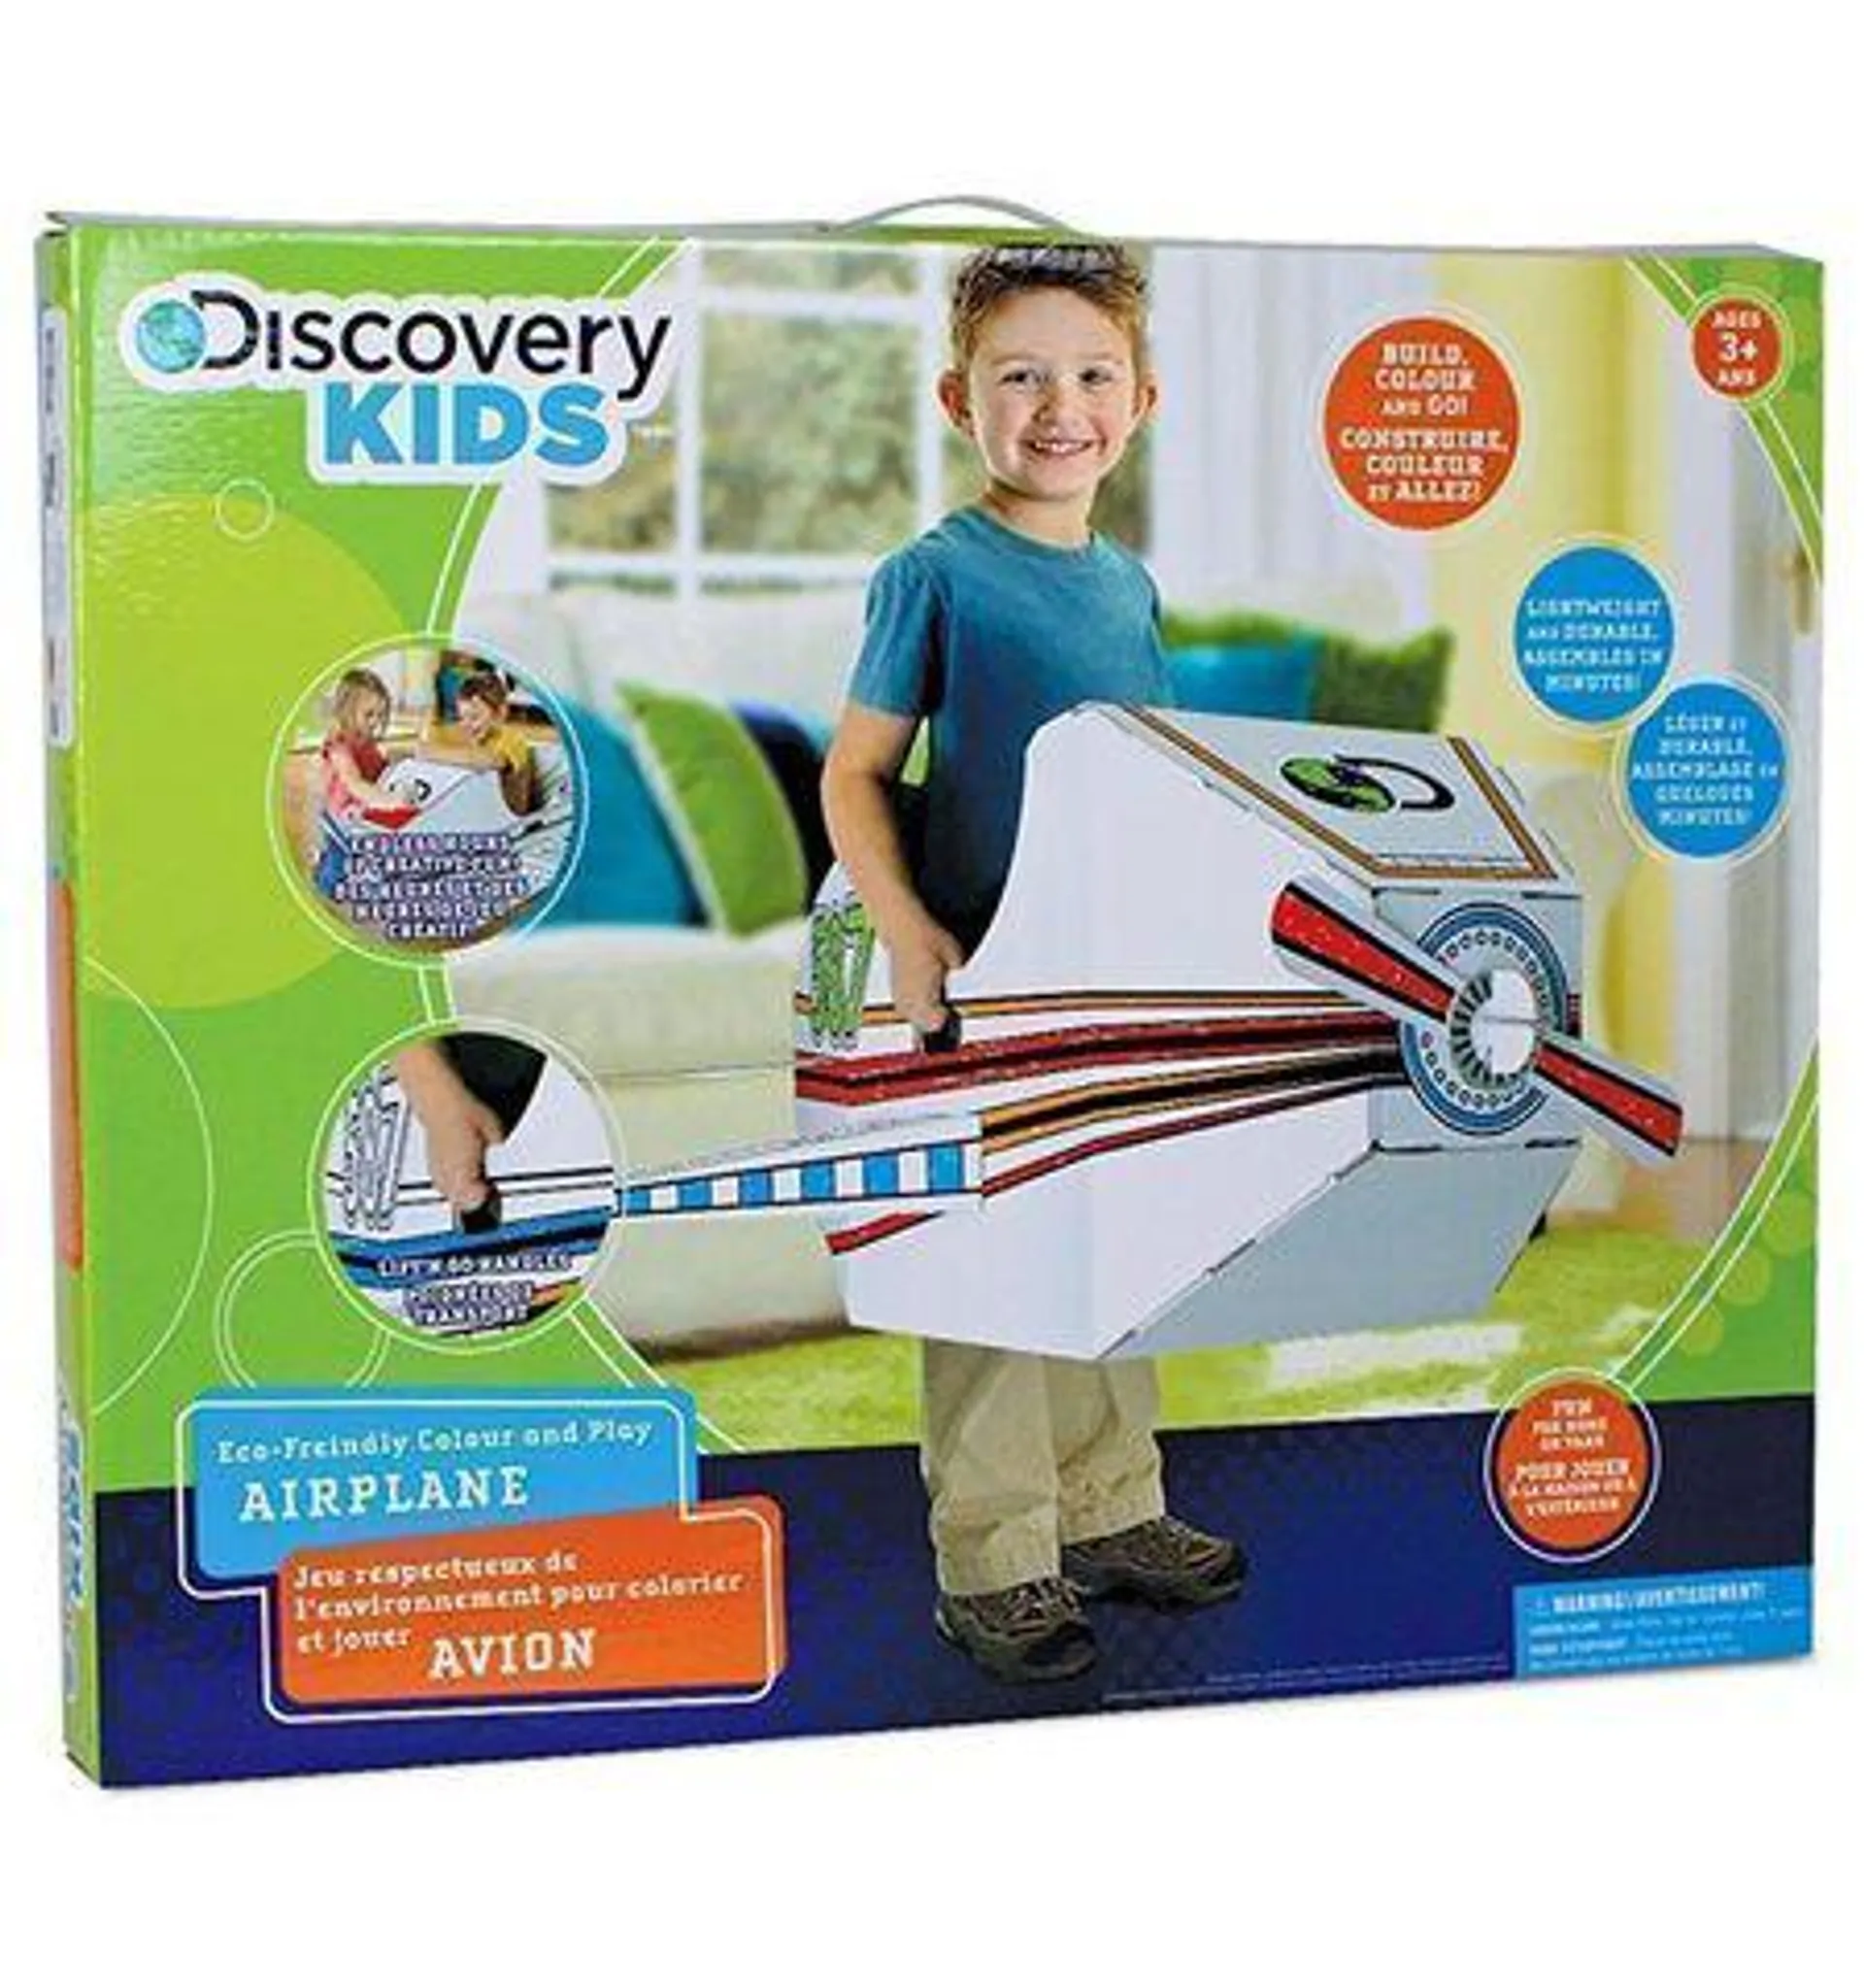 Discovery Kids Airplane